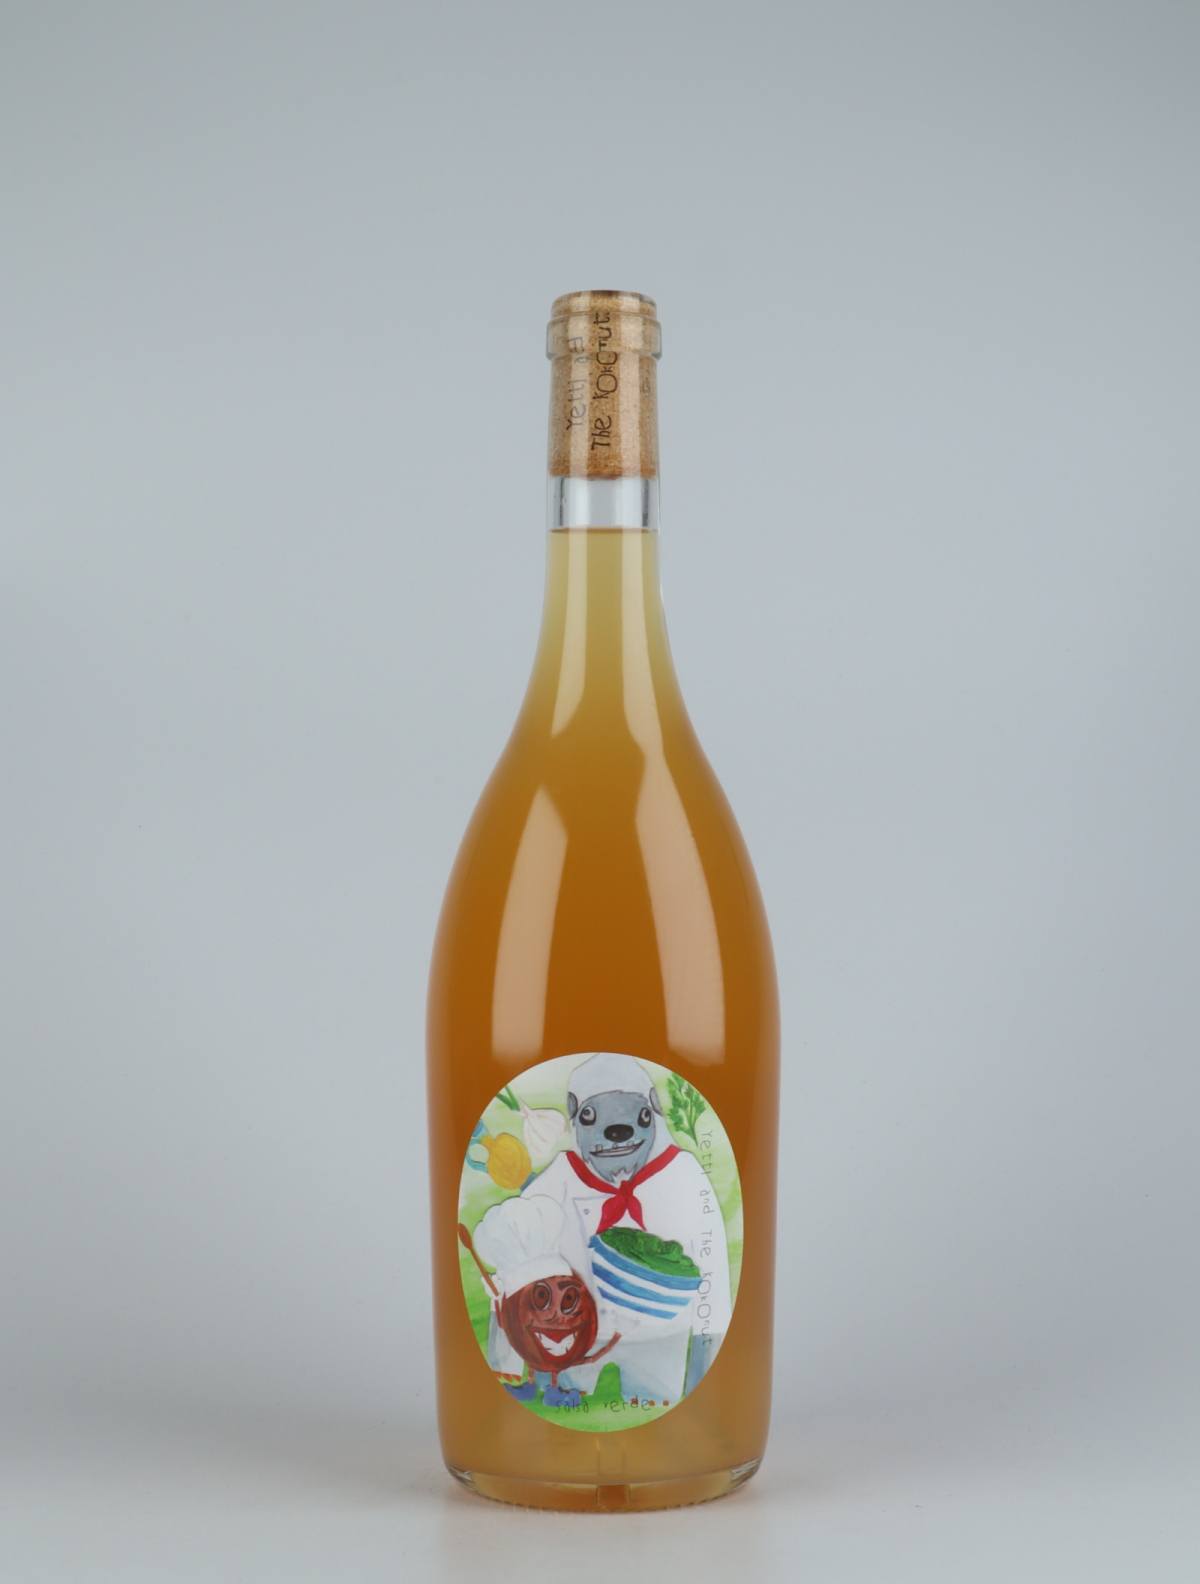 A bottle 2020 Salsa Verde White wine from Yetti and the Kokonut, Adelaide Hills in 